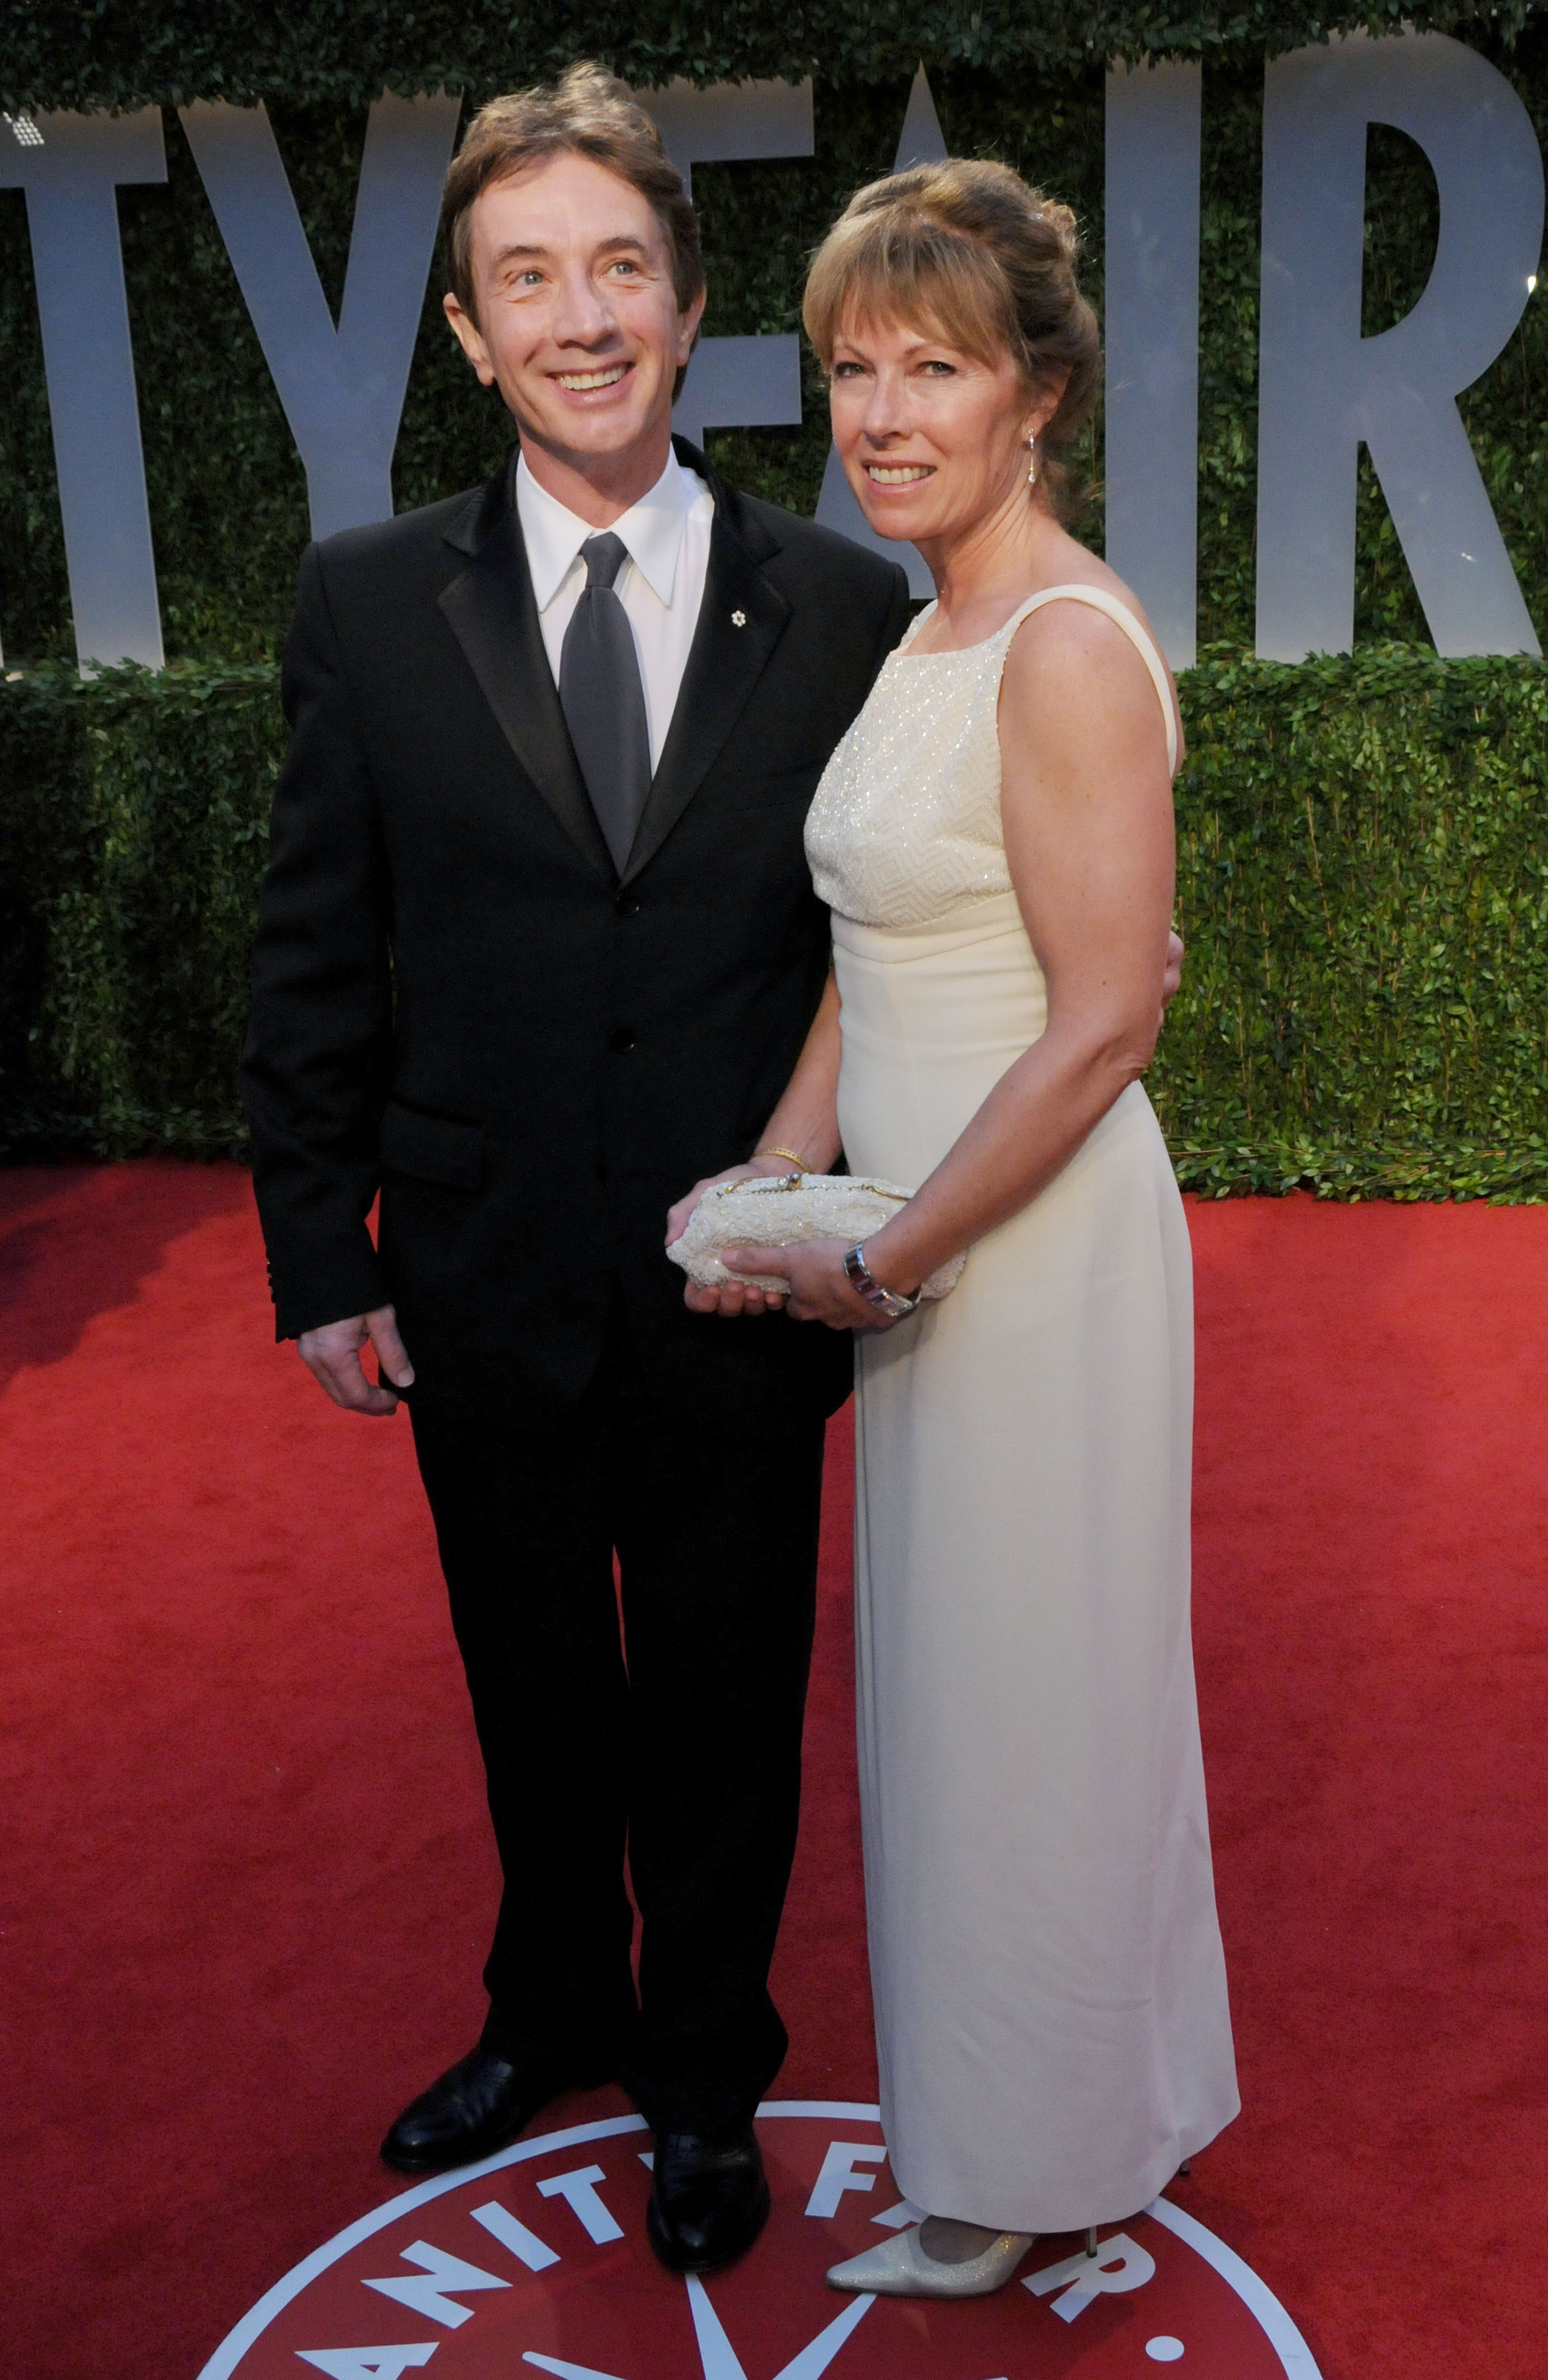 Martin Short and Nancy Dolman at the Vanity Fair Oscar Party held at the Sunset Tower Hotel in West Hollywood, California, on February 22, 2009. | Source: Getty Images